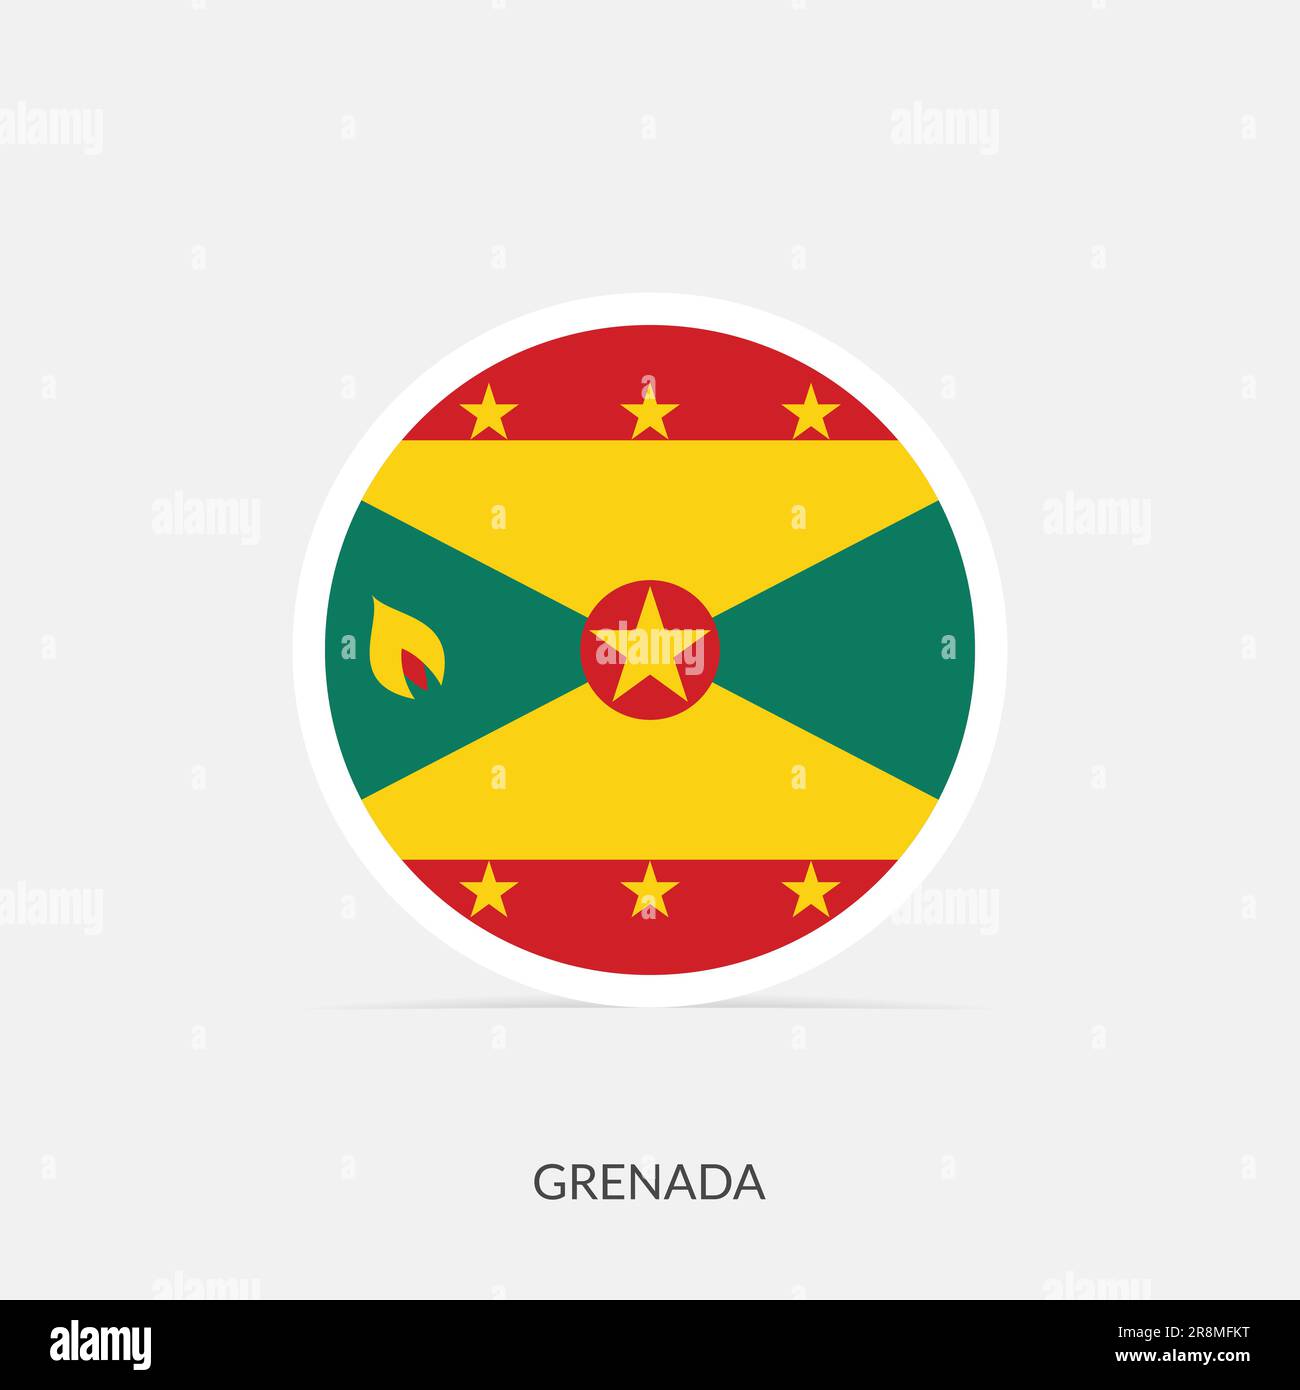 Grenada round flag icon with shadow. Stock Vector